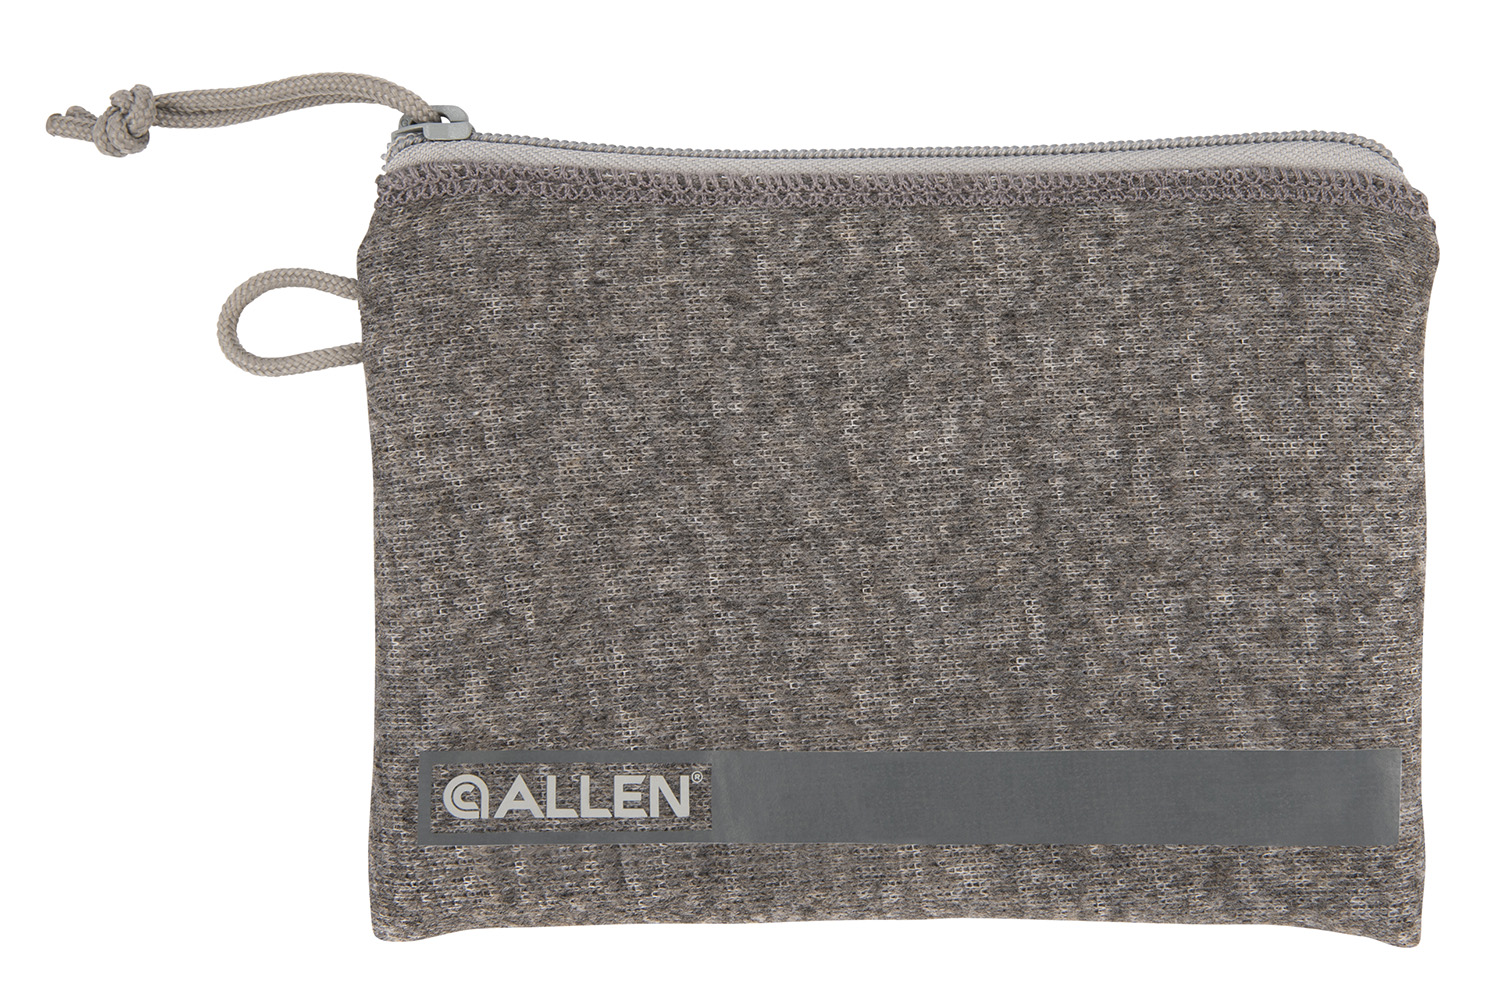 Allen 3625 Pistol Pouch  made of Gray Polyester with Lockable Zippers, ID Label & Fleece Lining Holds Compact Size Handgun 5